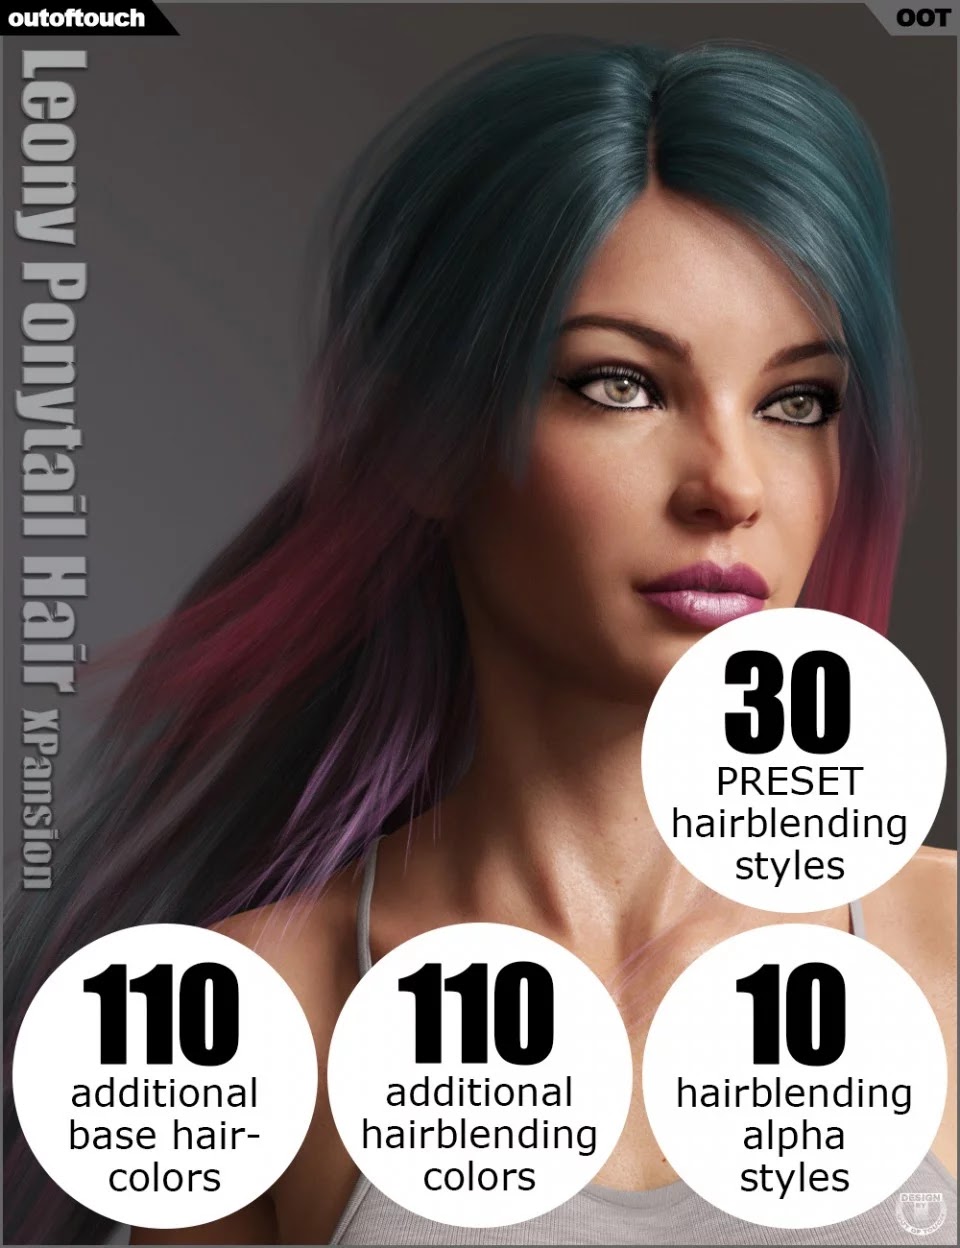 OOT Hairblending 2.0 Texture XPansion for Leony Wet & Dry Ponytail Hair_DAZ3DDL